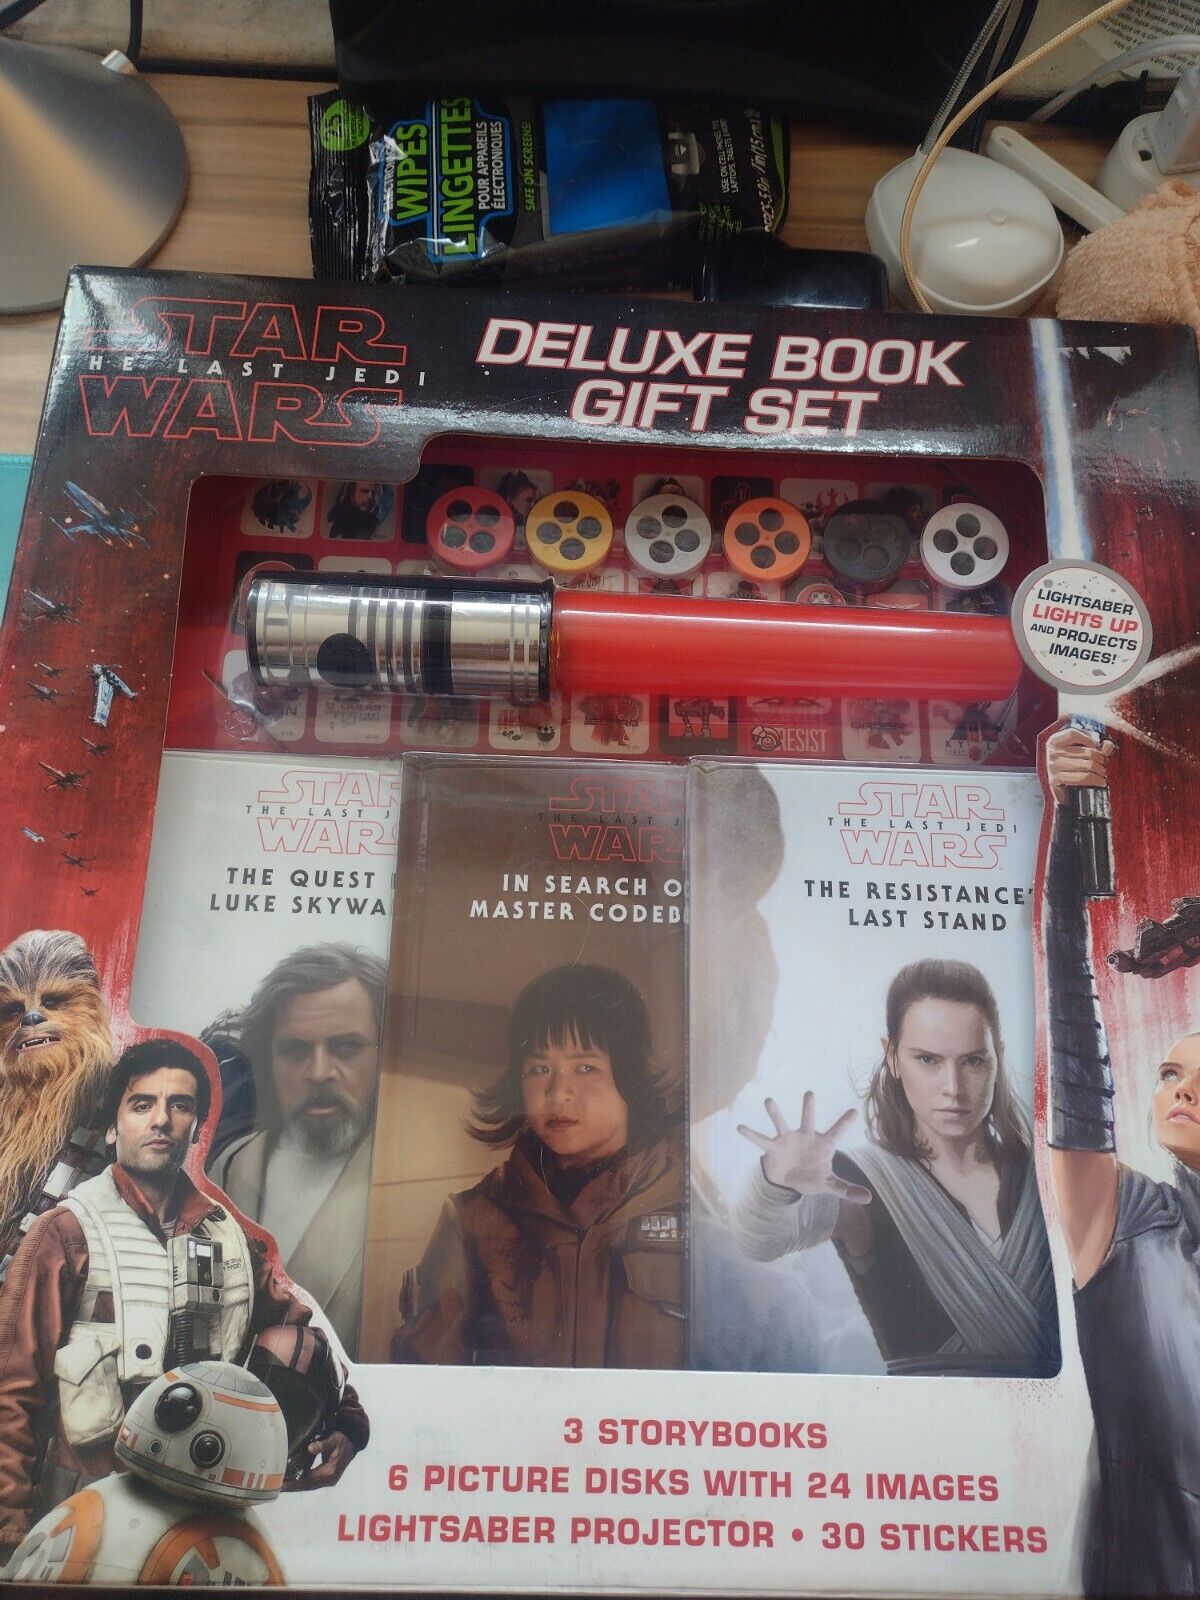 Star Wars The Last Jedi Deluxe Book Gift Set Lightsaber Projector, Storybooks